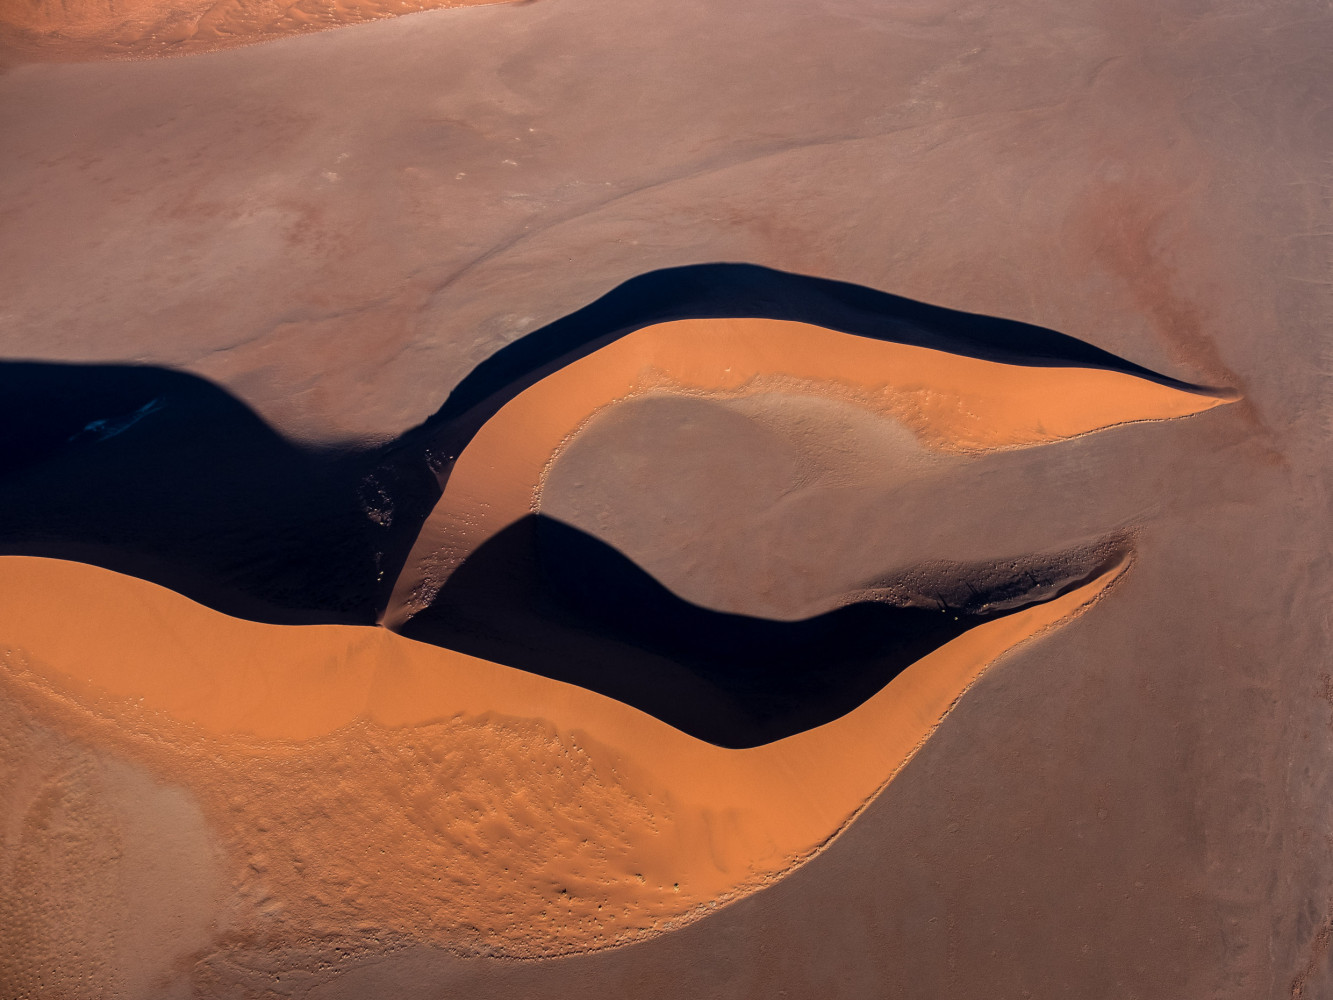 This aerial shot of a sand dune was taken in the Namib desert, Namibia from a Cessna plane.